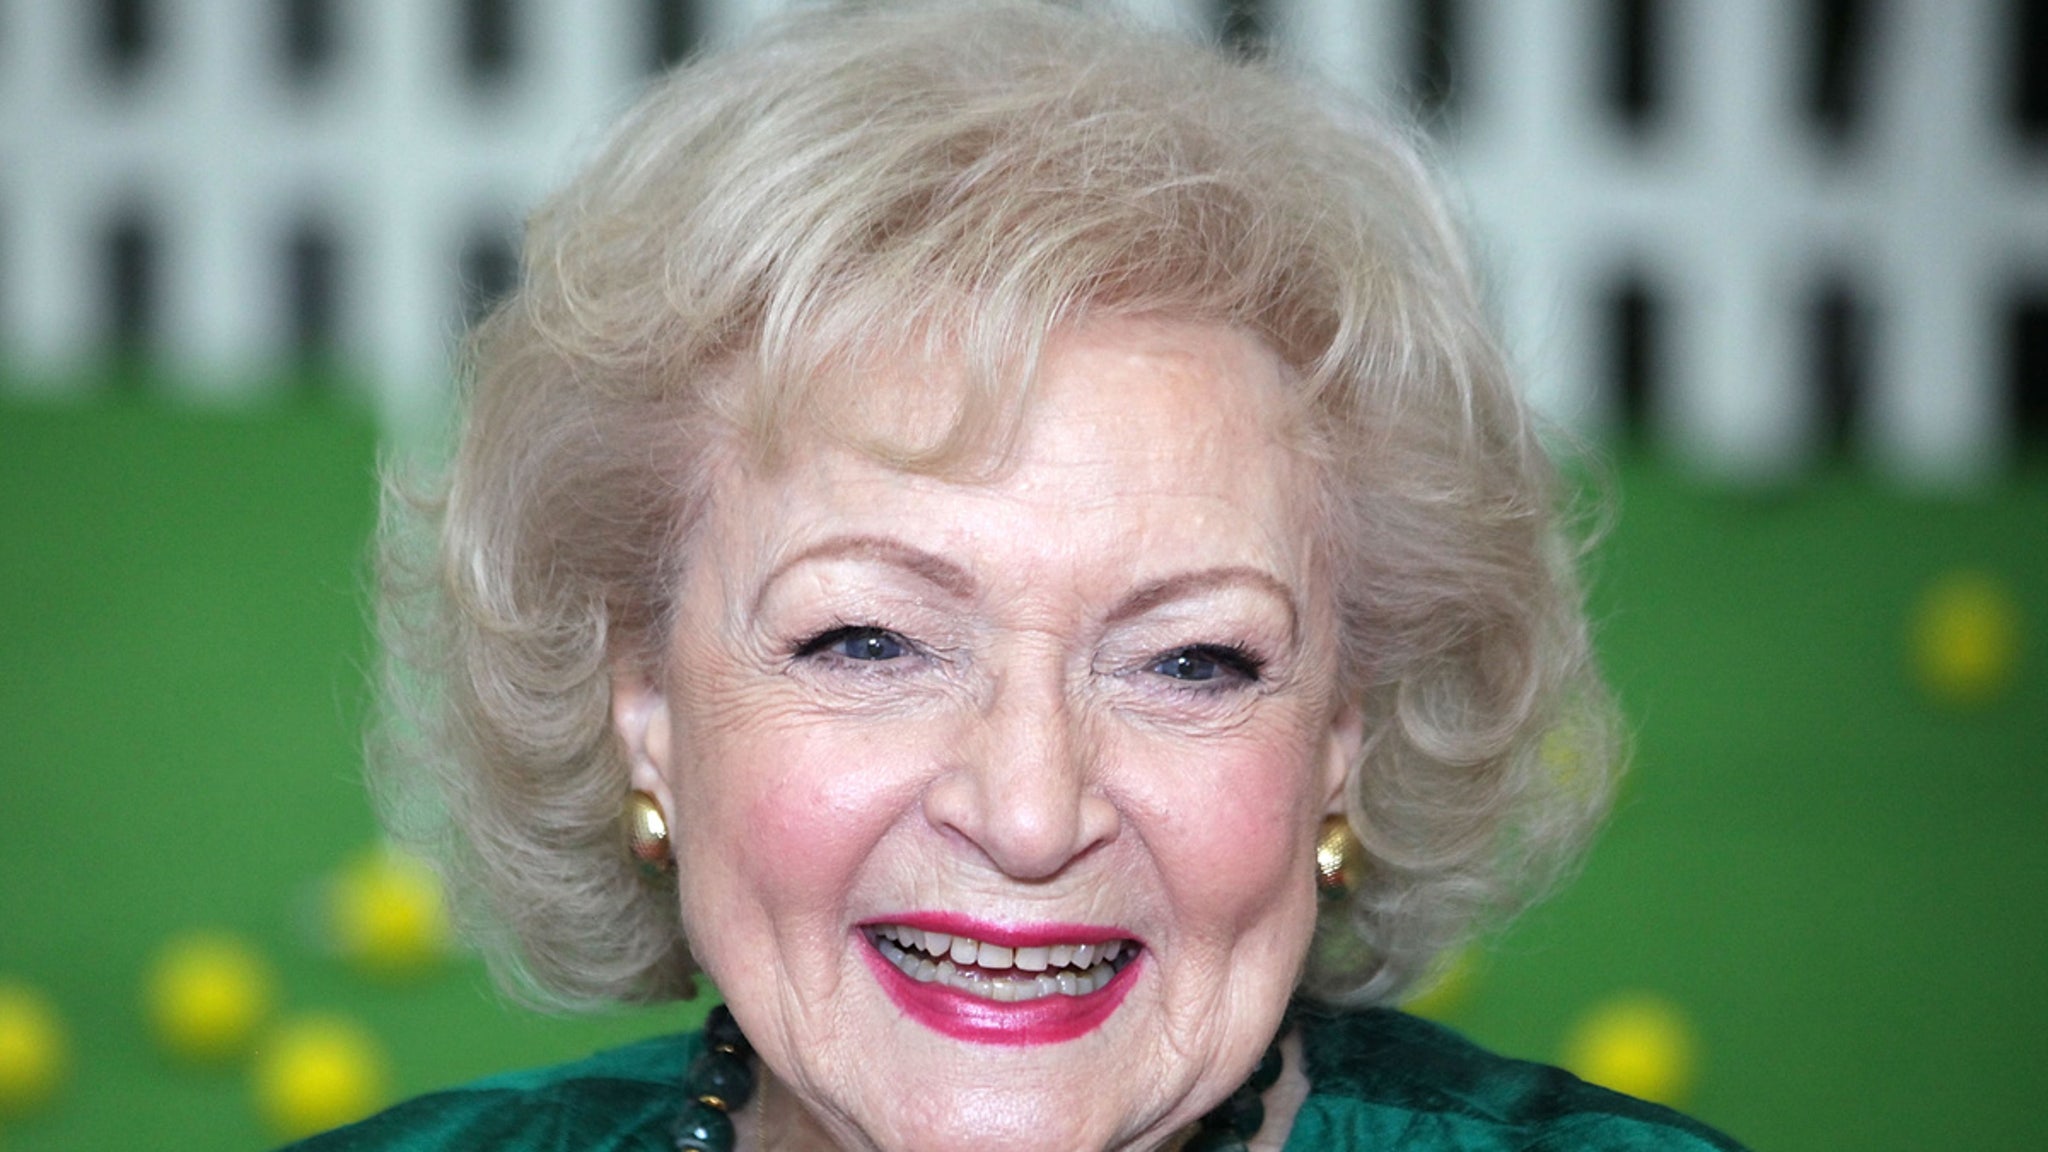 Betty White 100th Birthday Celebration Will Play in Theaters Despite Death